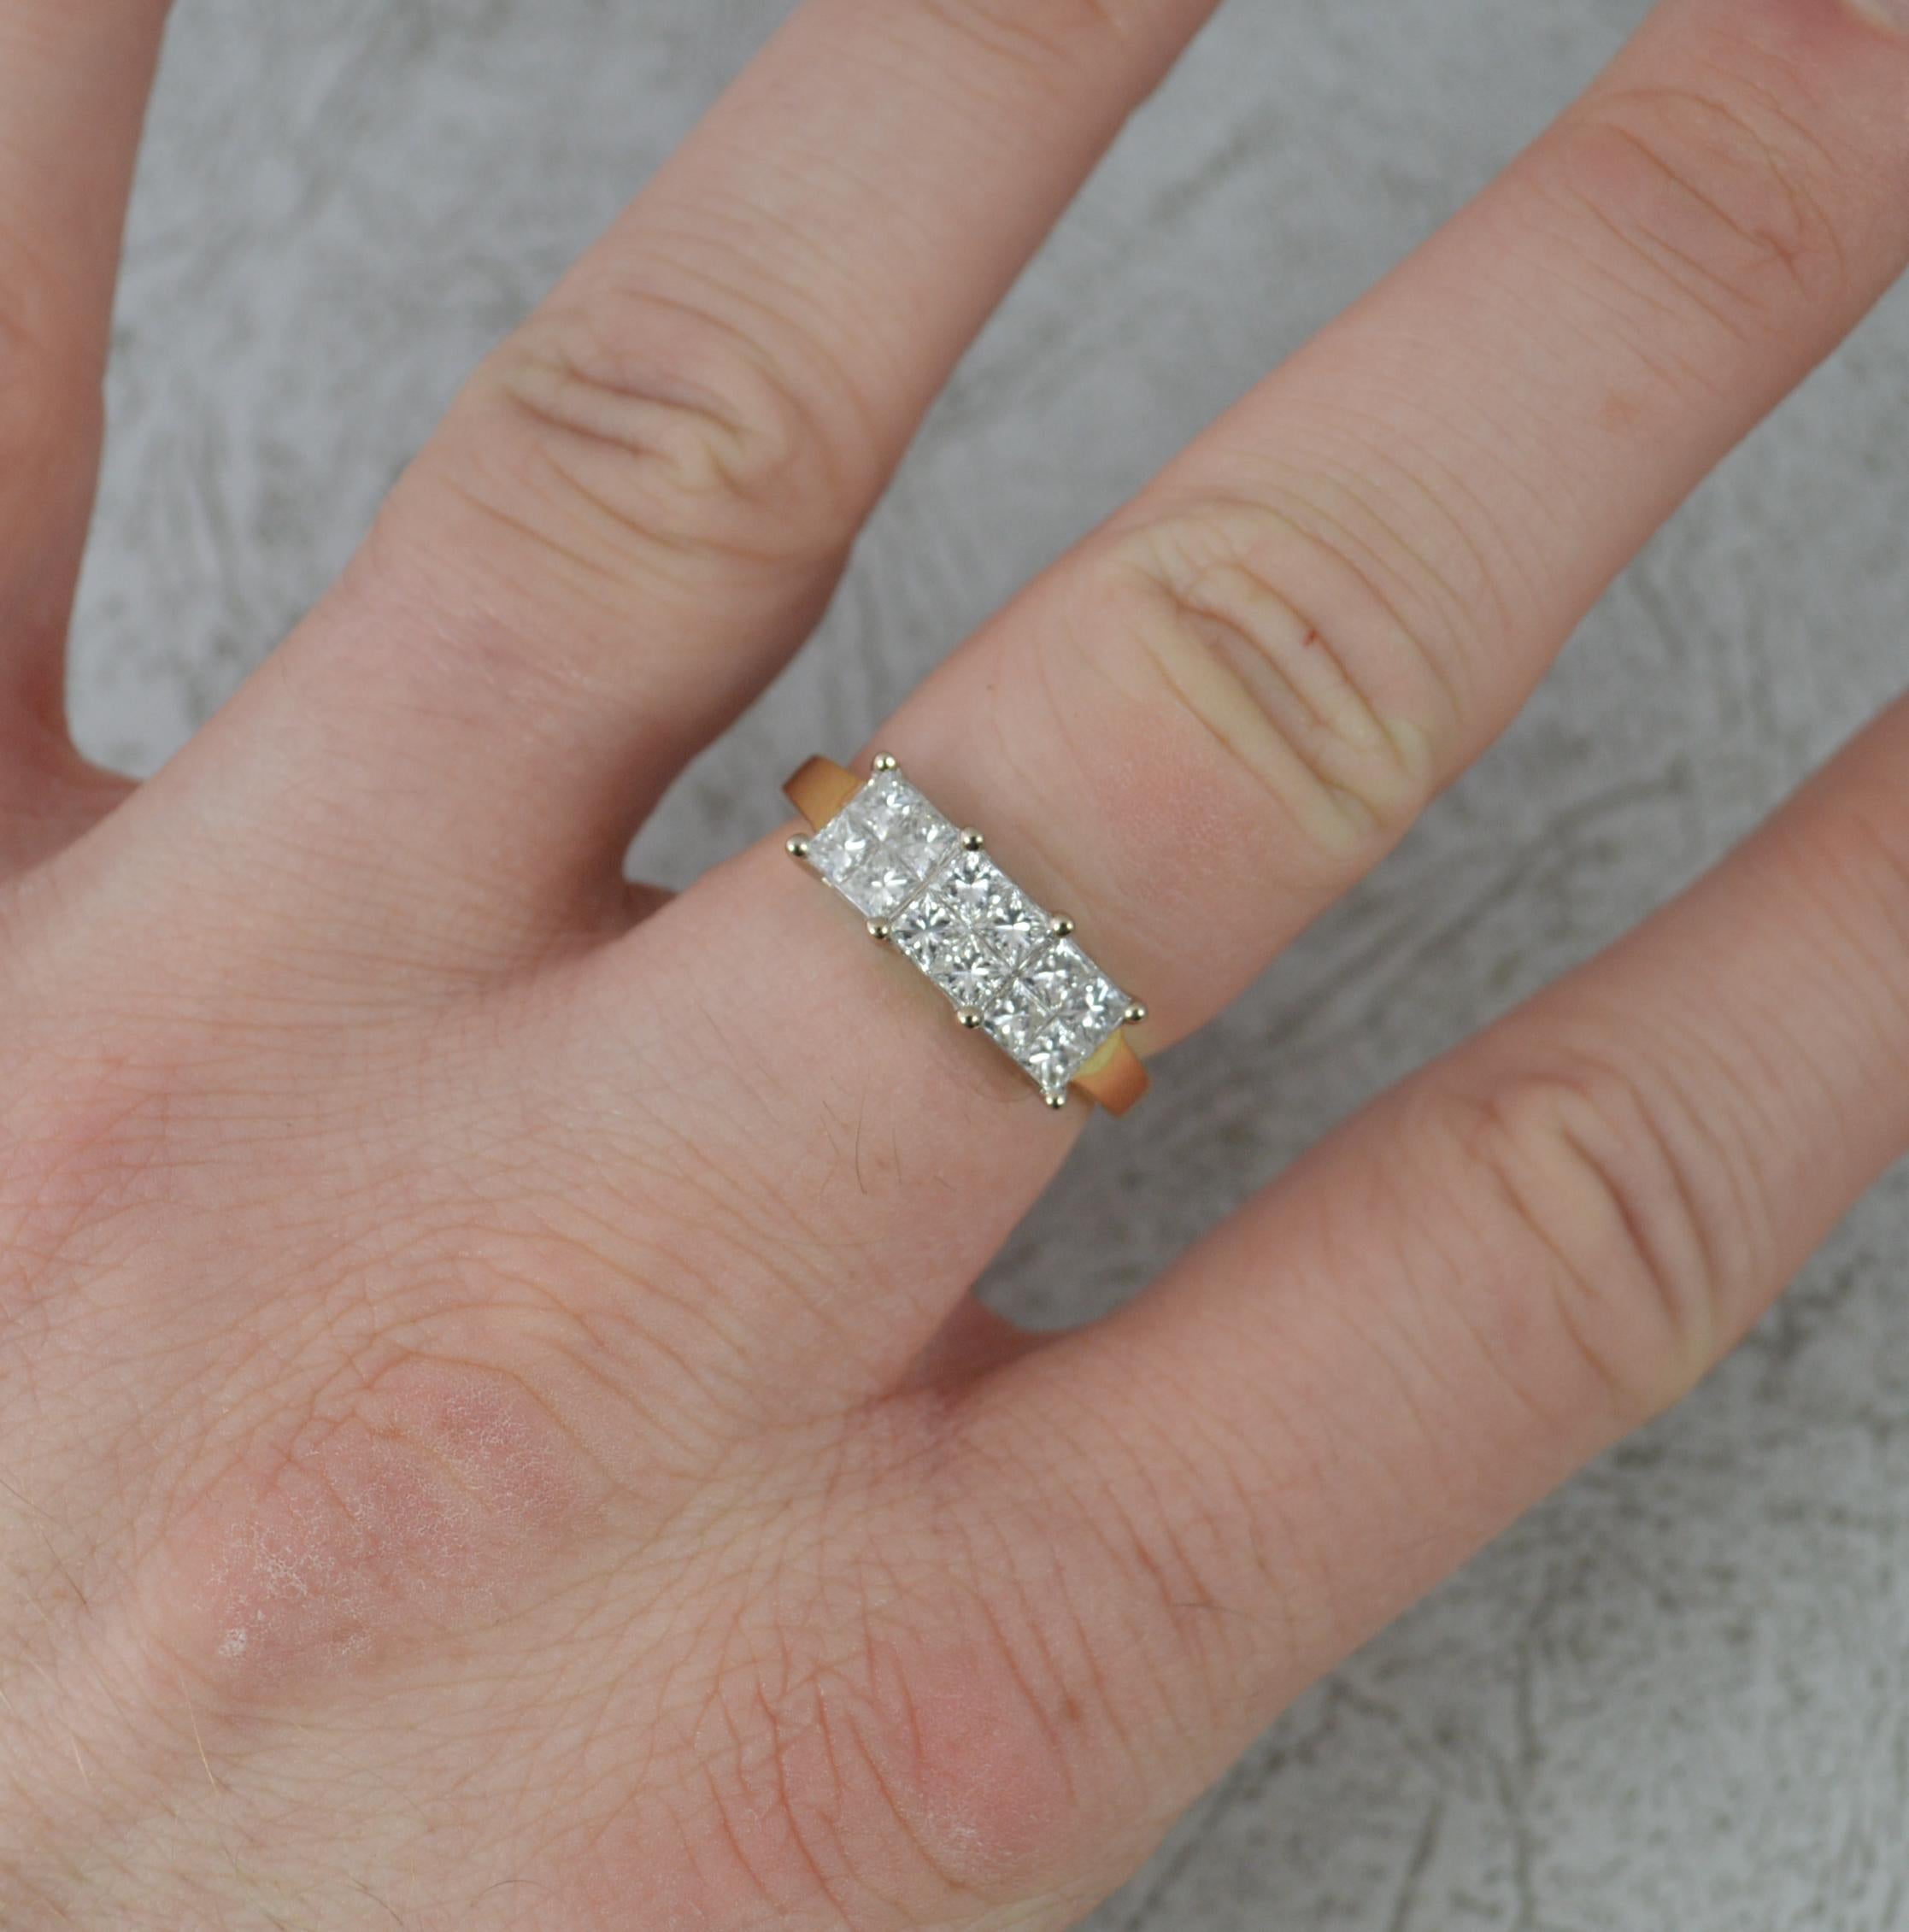 A well made diamond cluster ring.
Solid 18 carat yellow gold shank and white gold head setting.
Designed with three triple clusters of four princess cut diamonds. 1.00 carat total weight. Vs clarity, g-h colour.
15mm x 6mm cluster head.

CONDITION ;